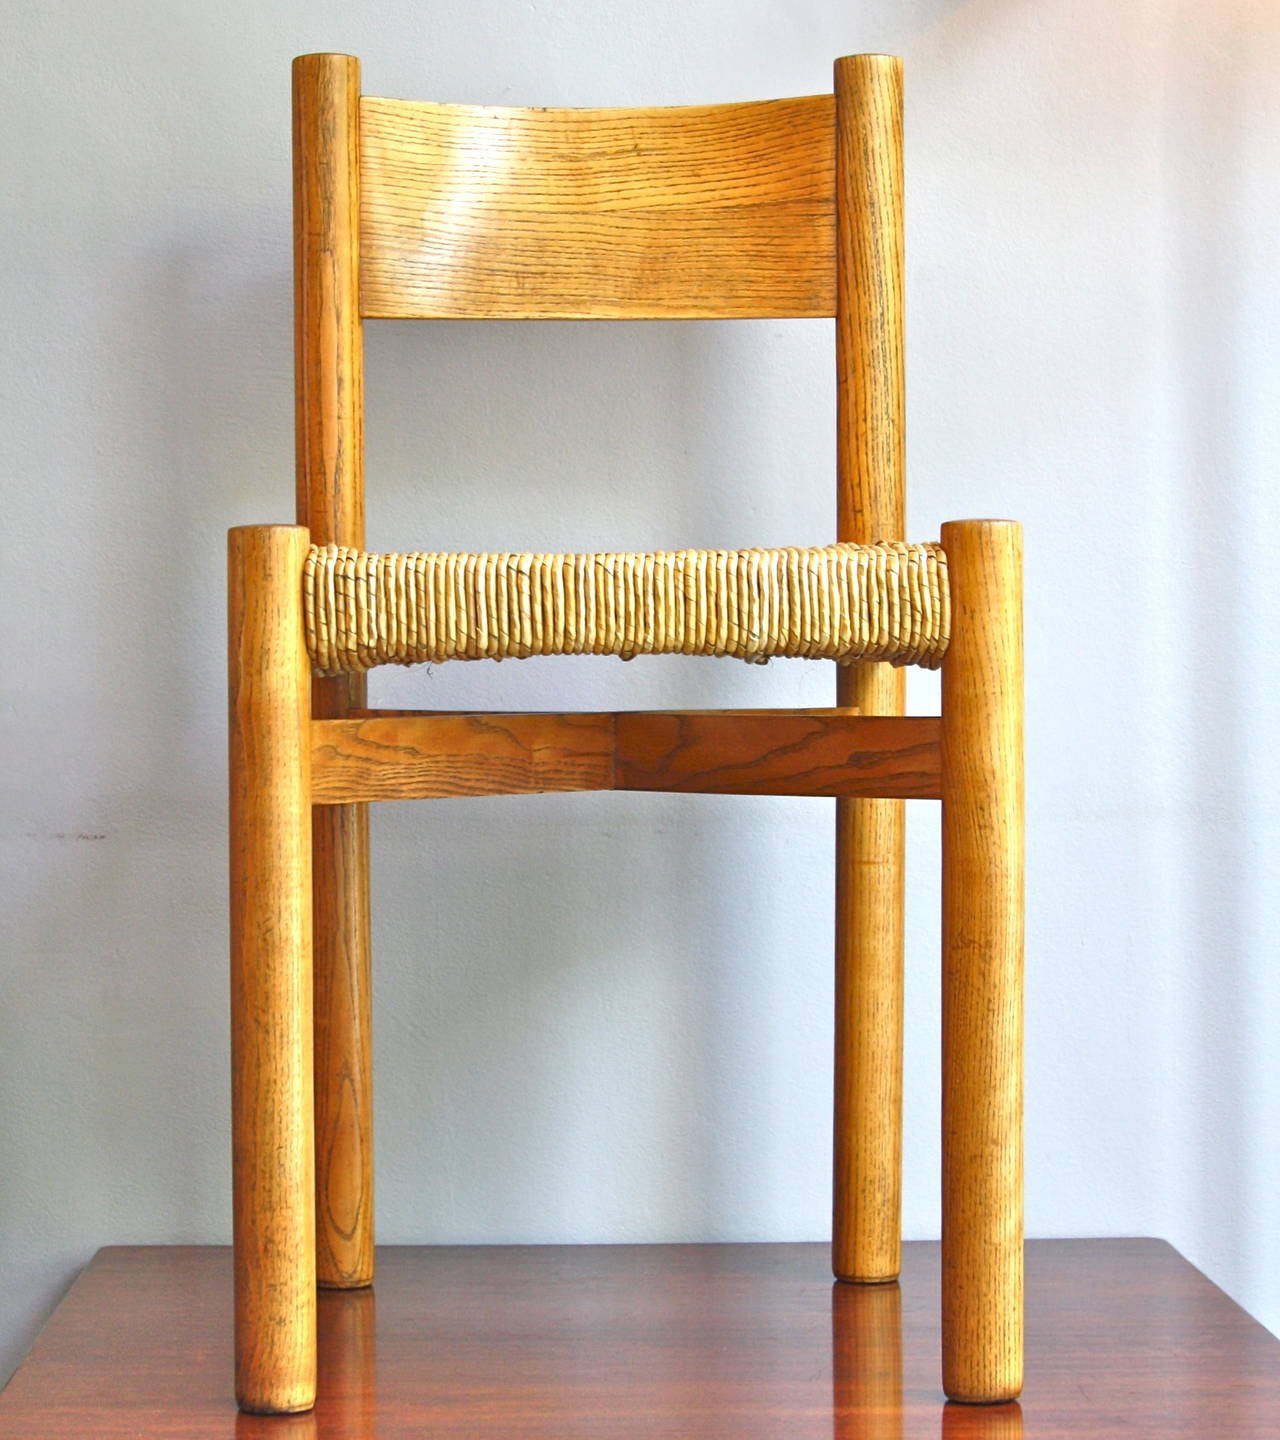 A strong and beautiful side chair by Charlotte Perriand. Taking inspiration from classic french framer furniture and seating this wonderful piece is executed perfectly. With an amazing hand woven rush seat and amazing proportions applied to the